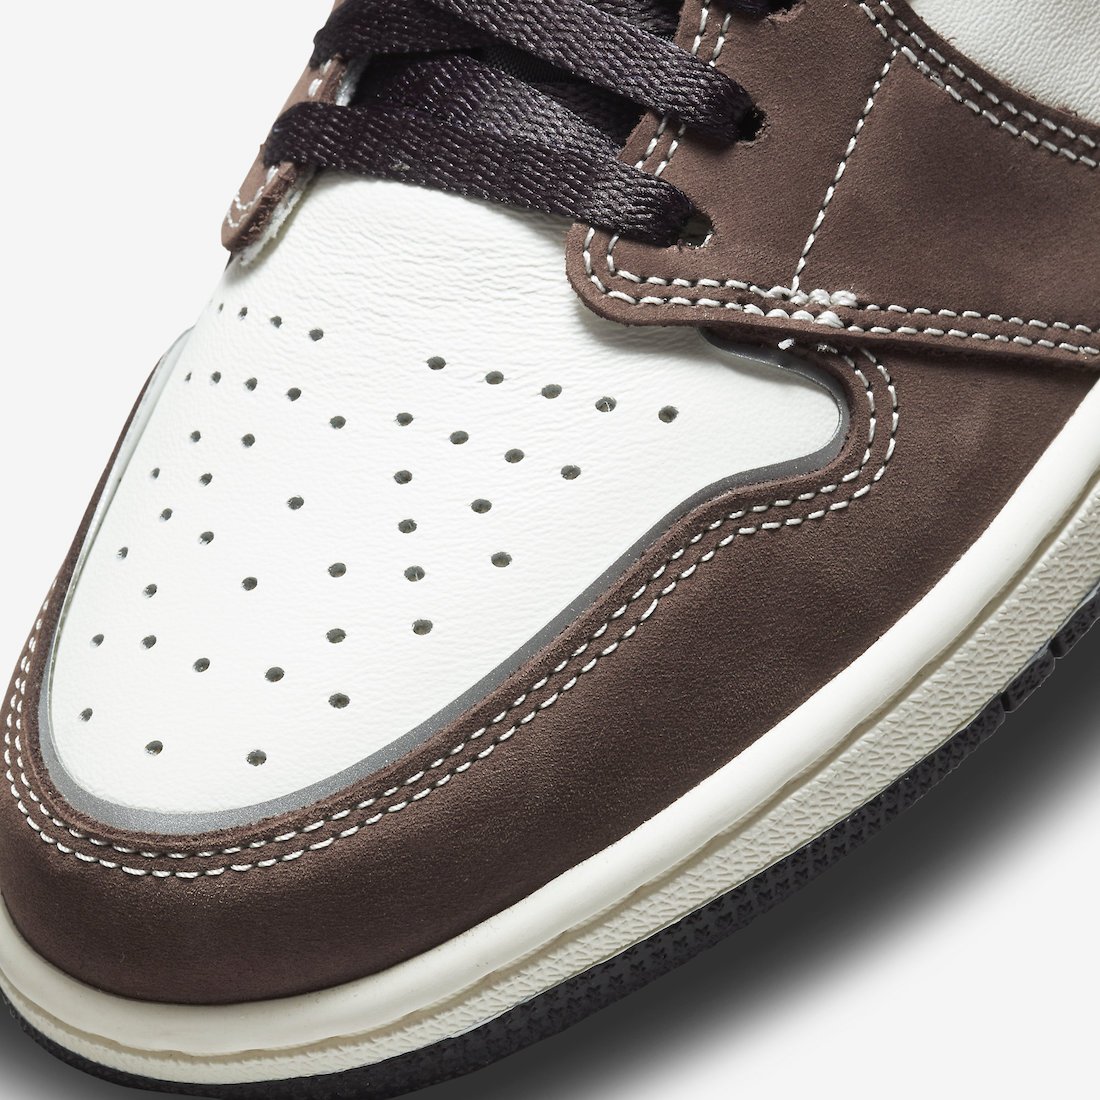 Air-Jordan-1-Hand-Crafted-Archaeo-Brown-DH3097-001-Release-Date.jpeg-6.jpeg